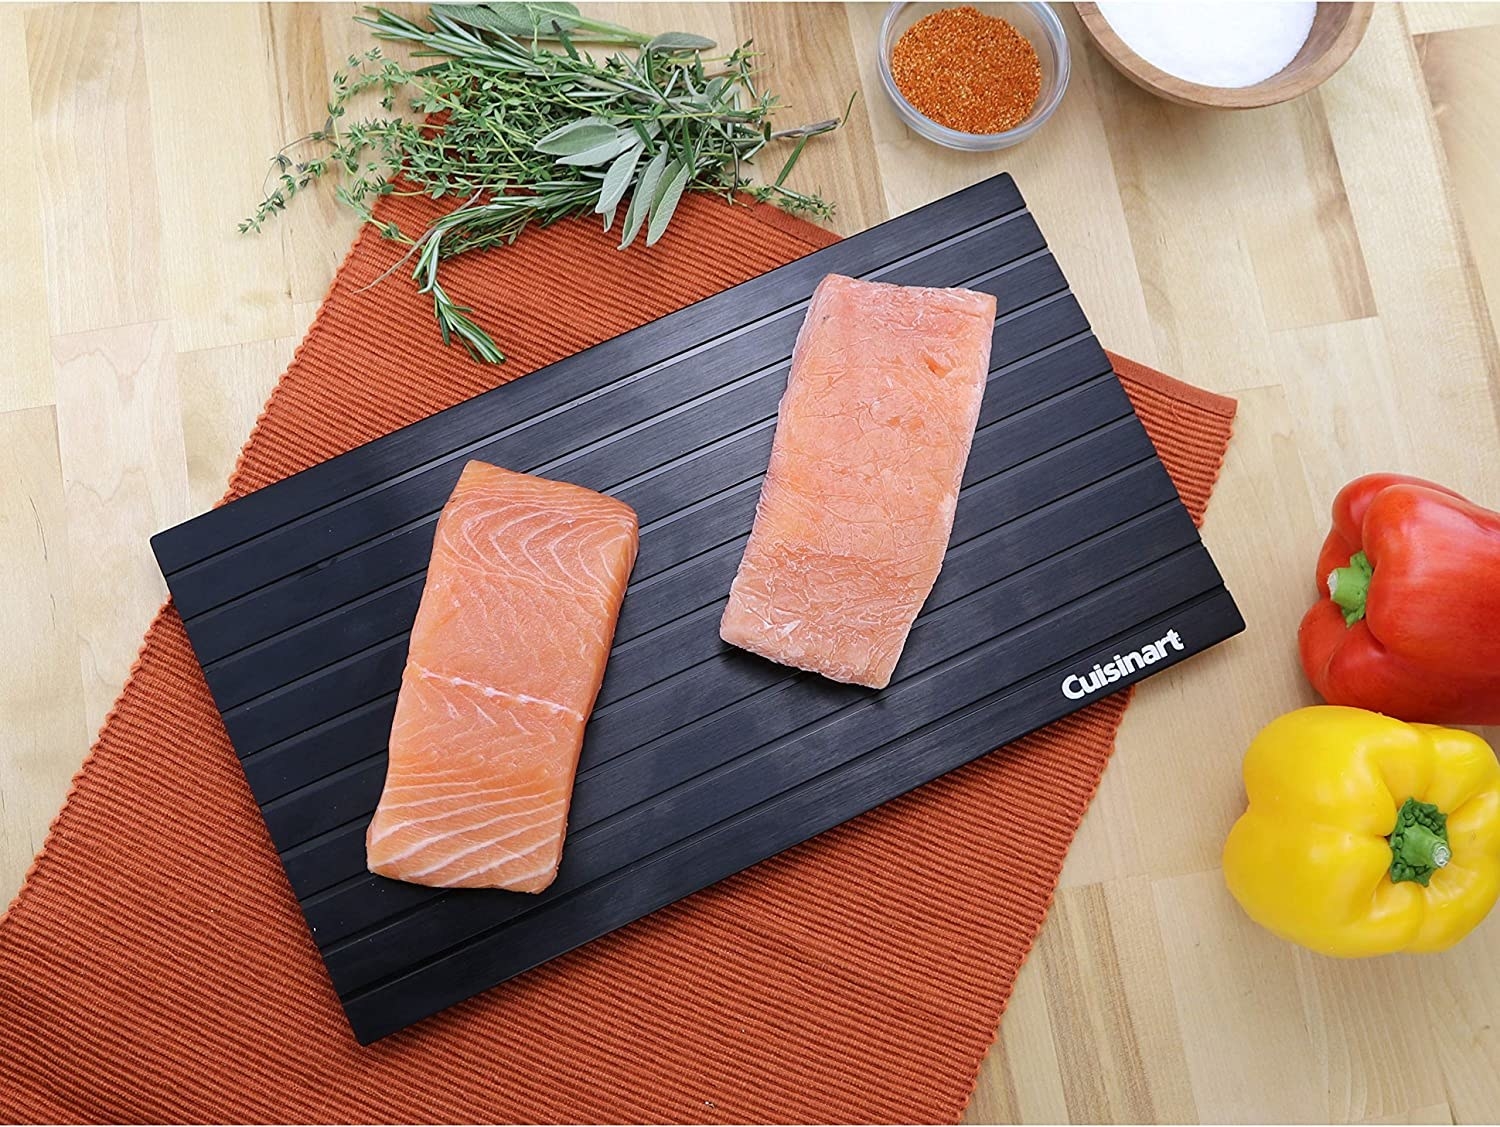 A picture of a defroster and cutting board with a slab of raw meat on it